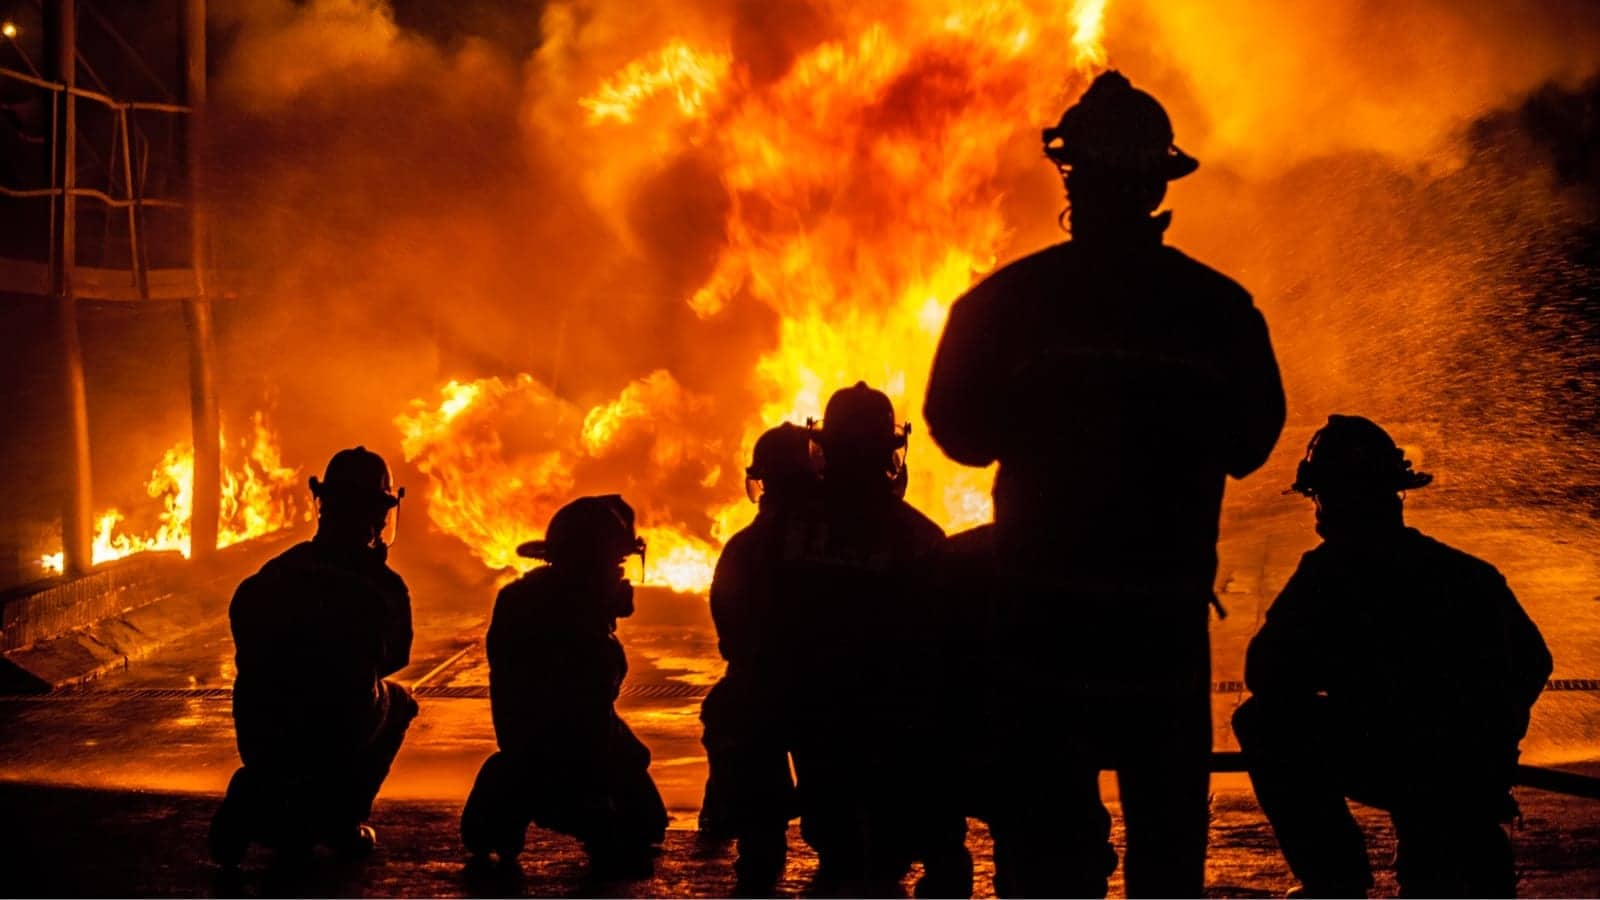 firefighter's silhouettes watching a fire burn